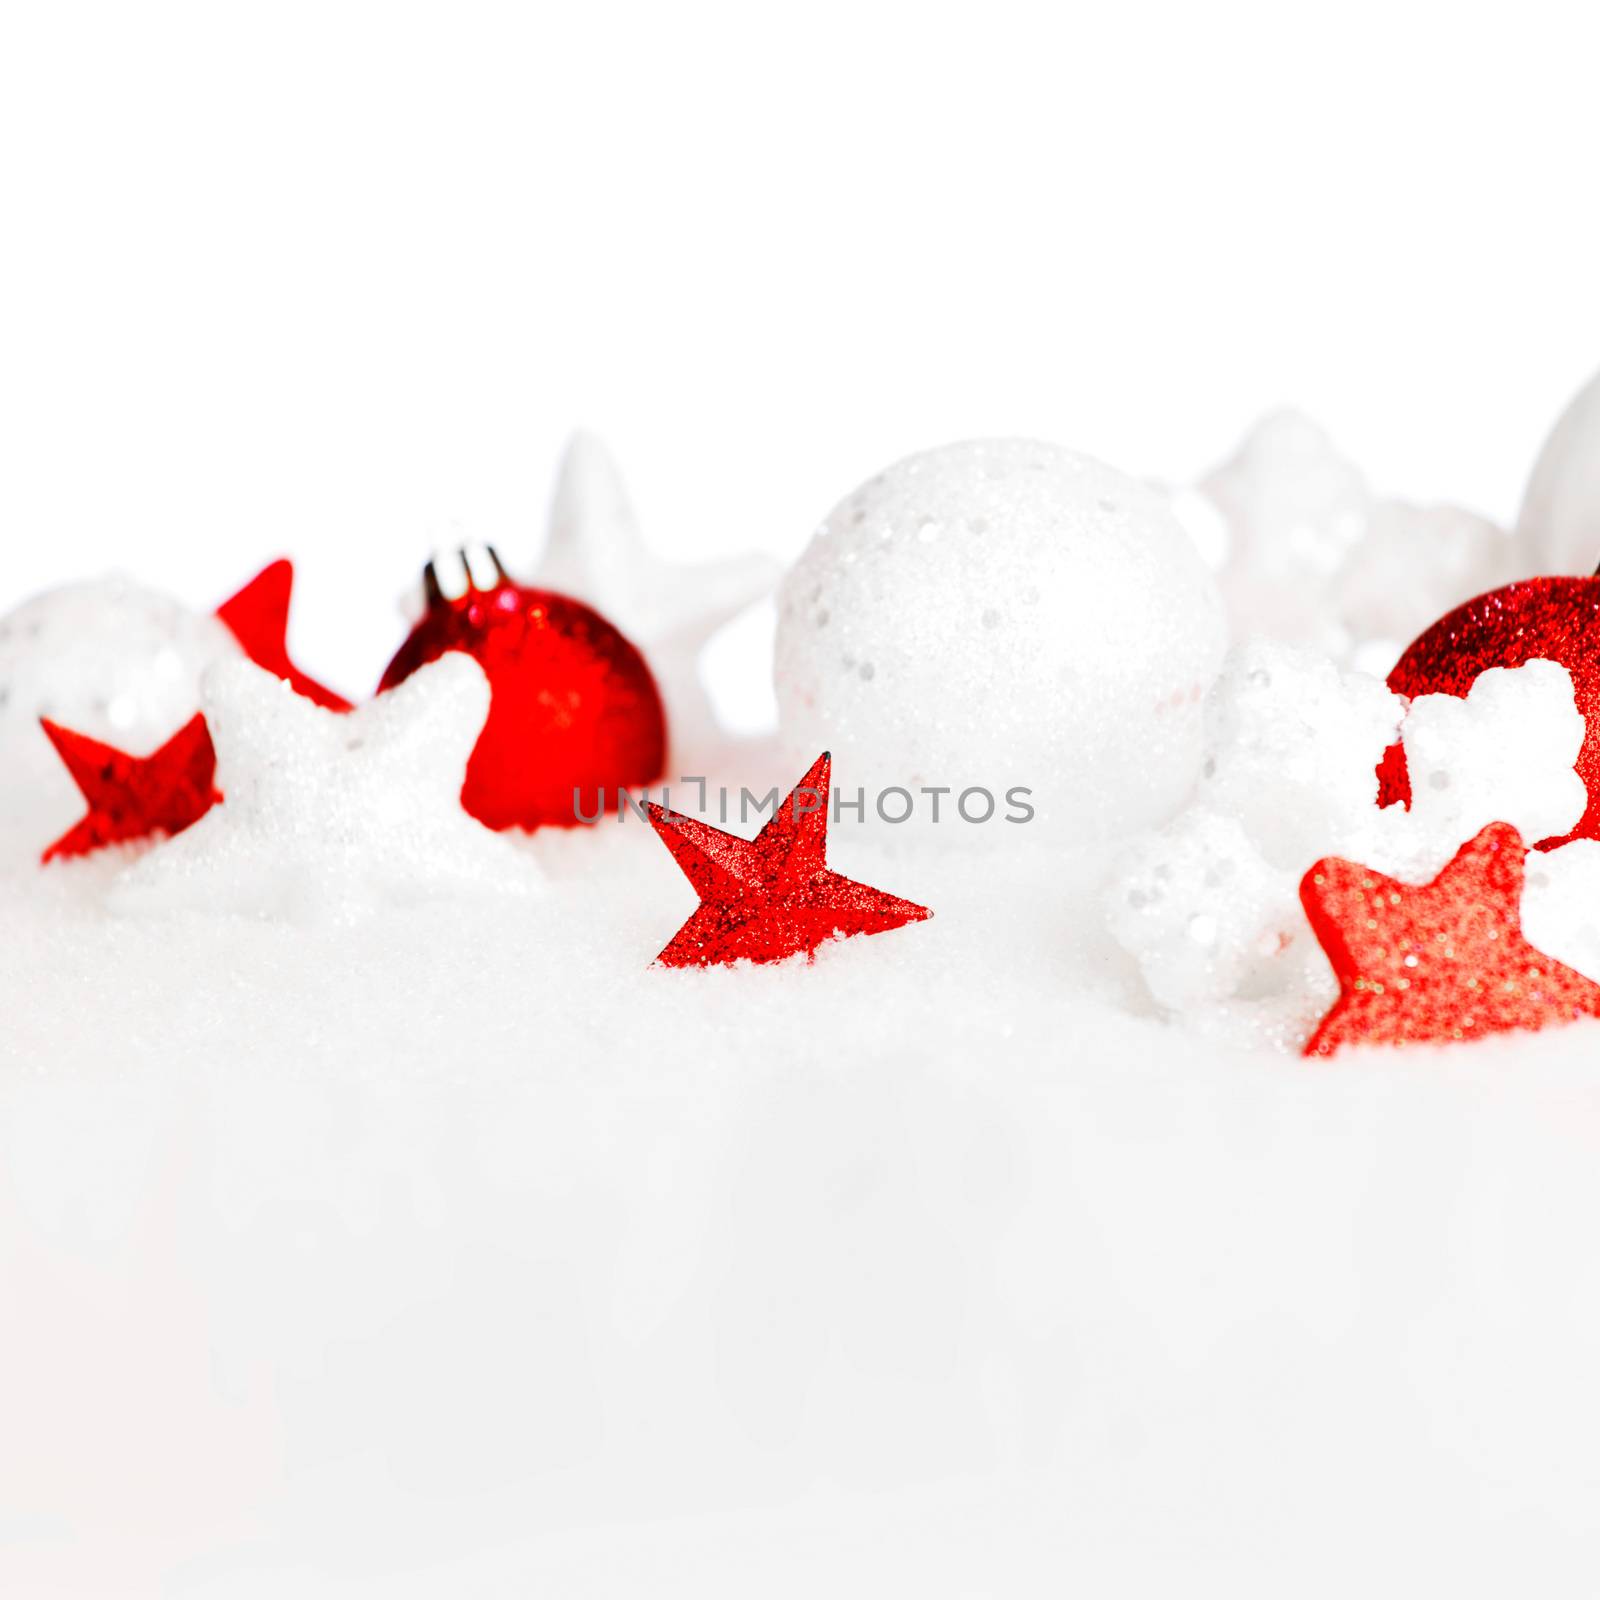 Christmas decorations in snow by Yellowj